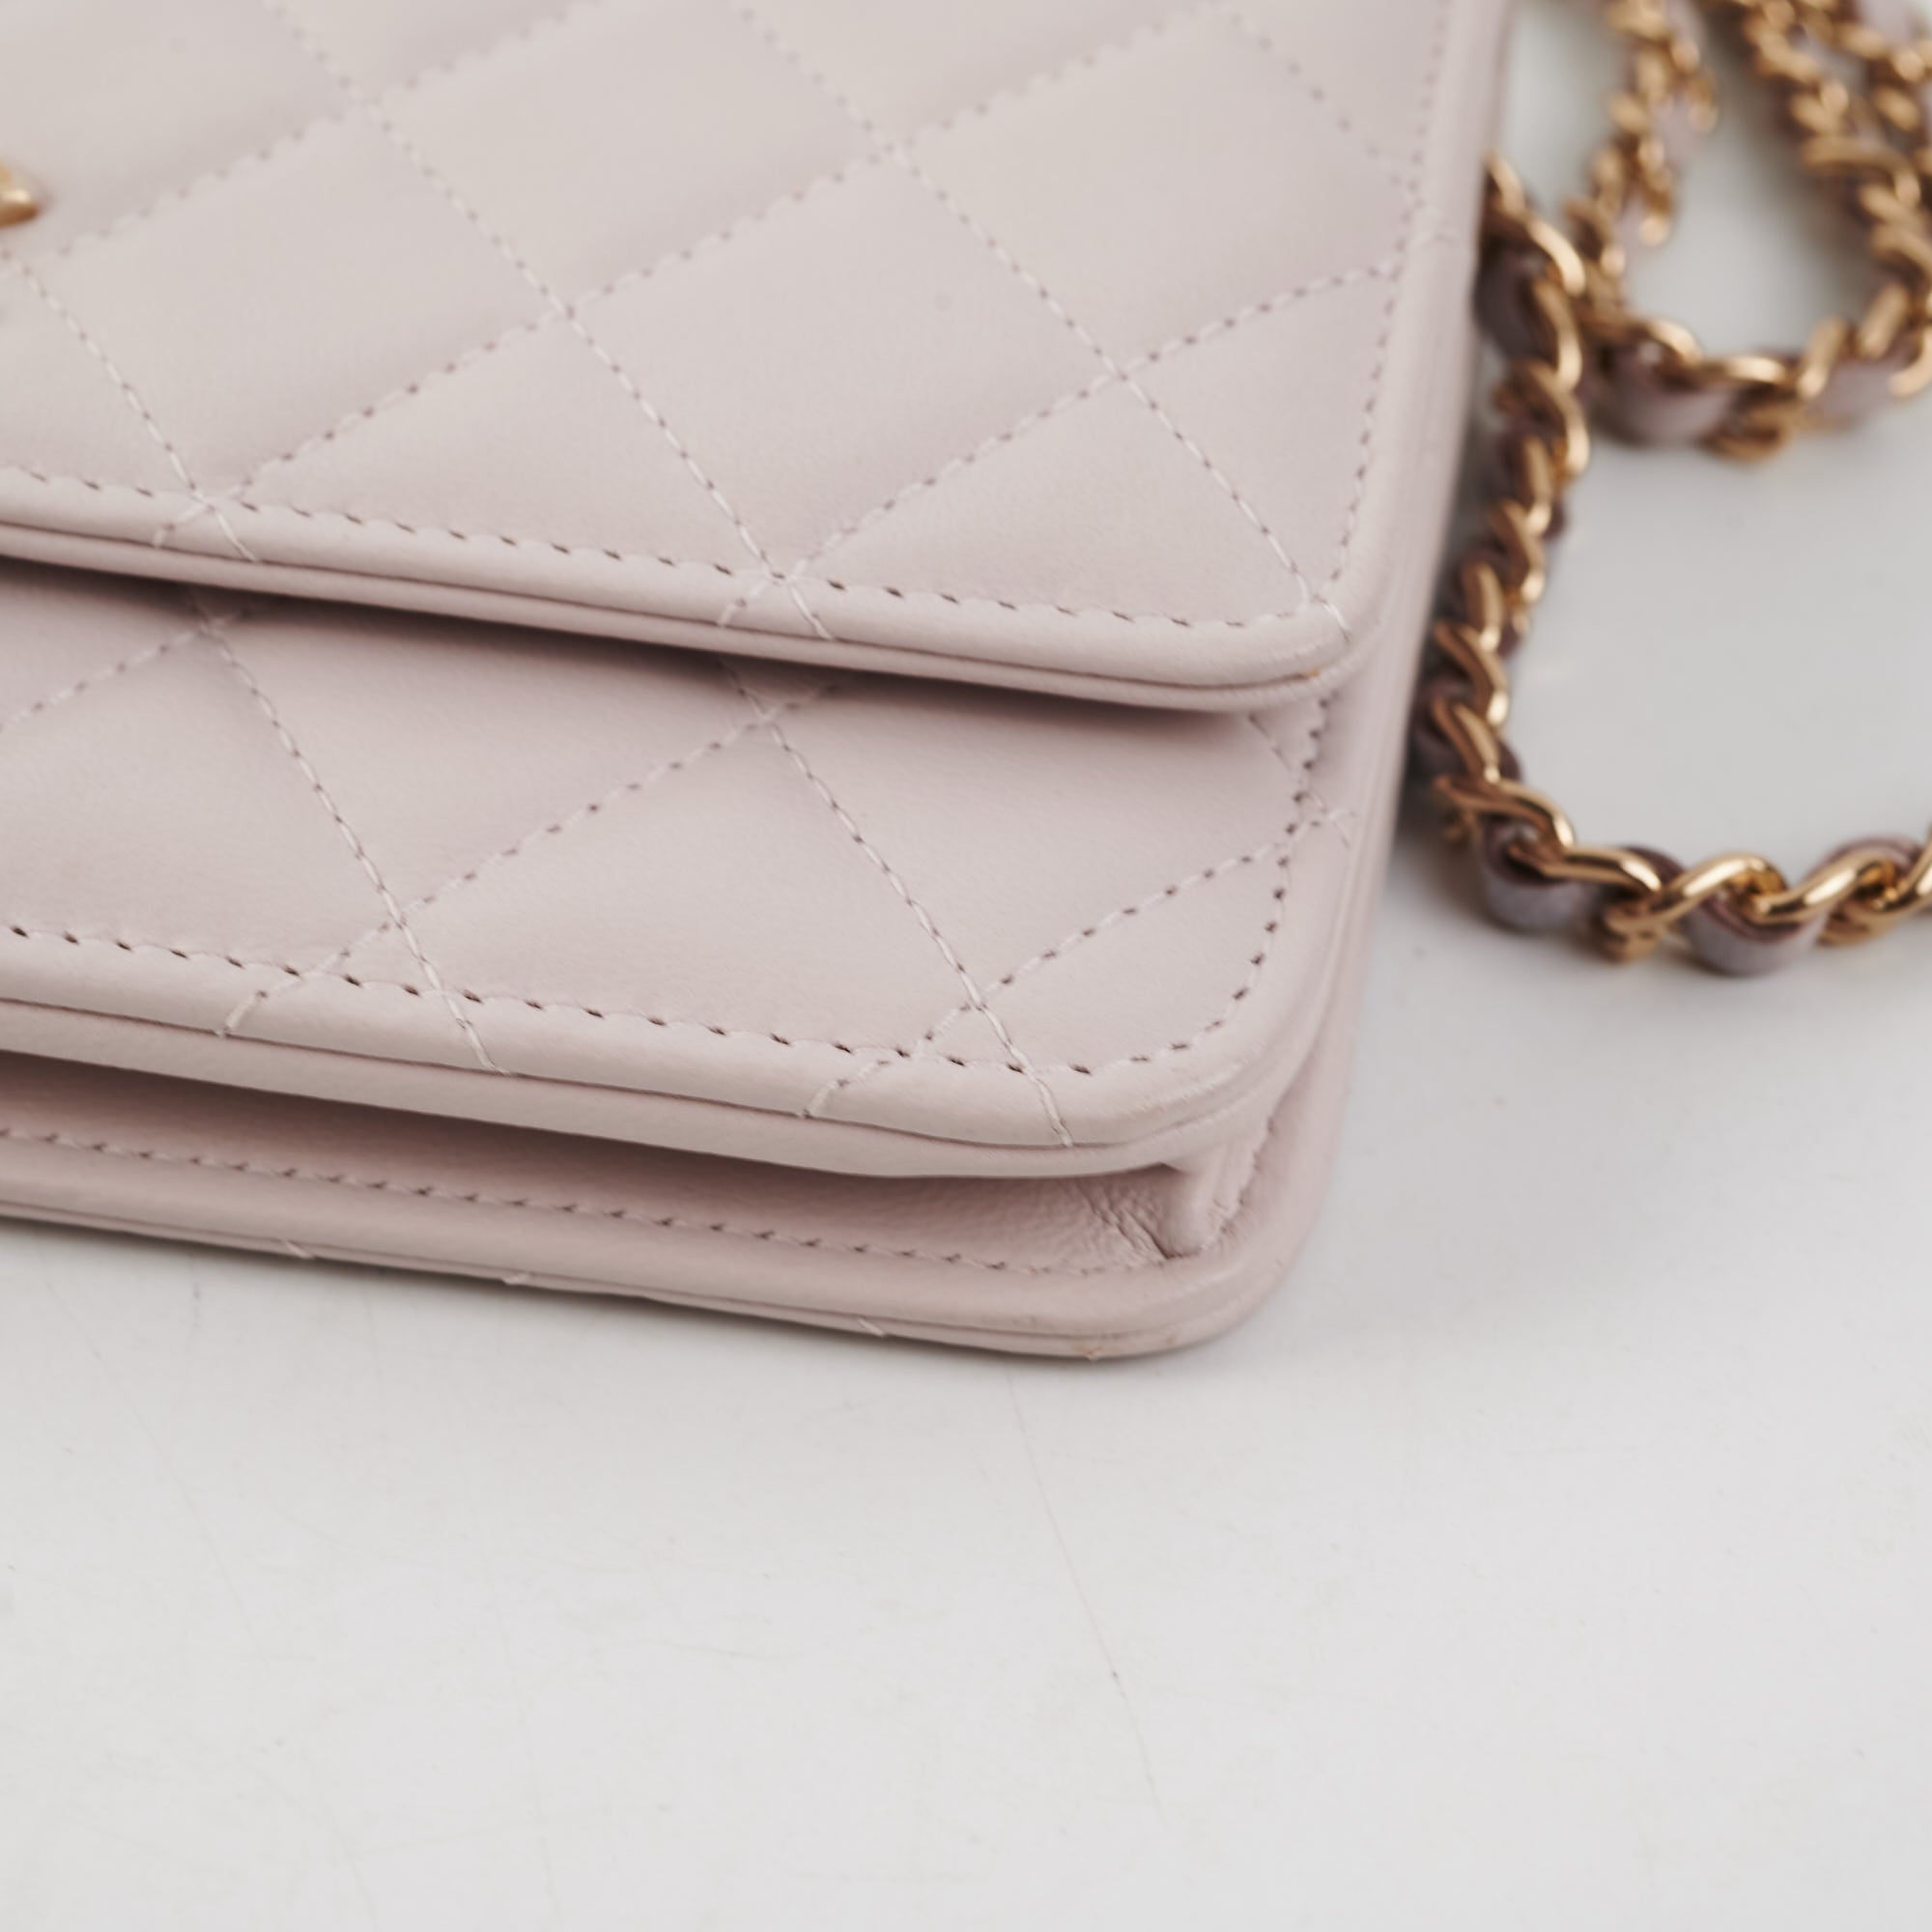 Chanel Wallet On Chain Woc Trendy Cc Light Pink - The Purse Affair